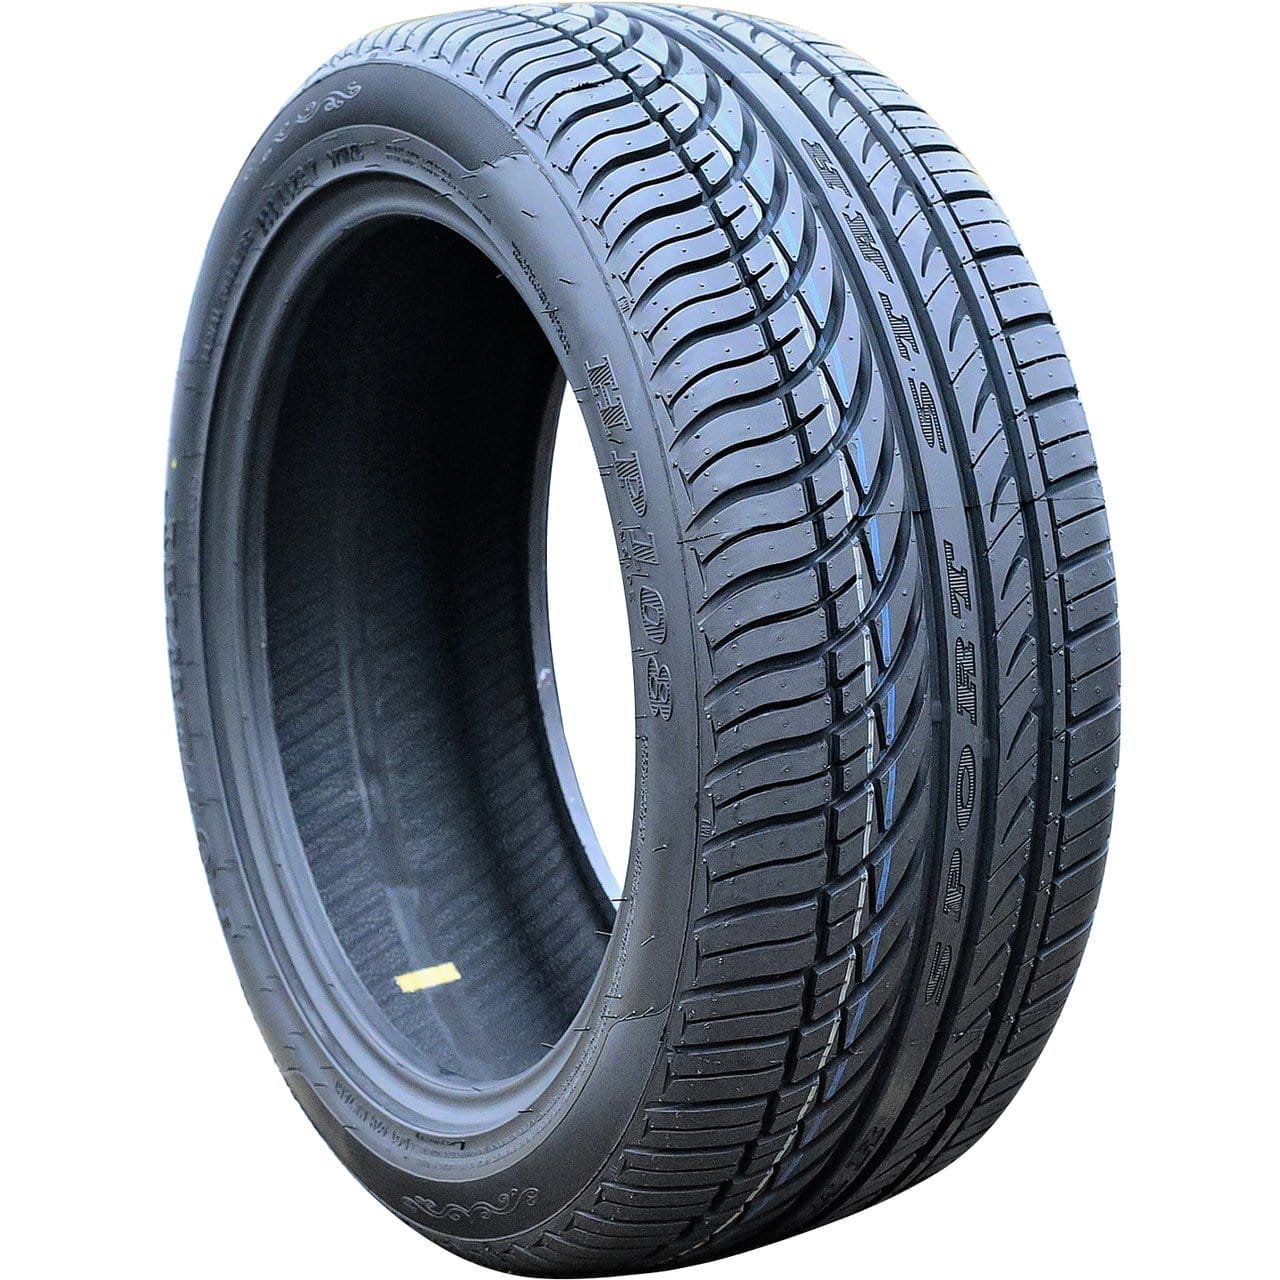 Image of Fullway HP108 205/55R16 91V AS A/S All Season Tire